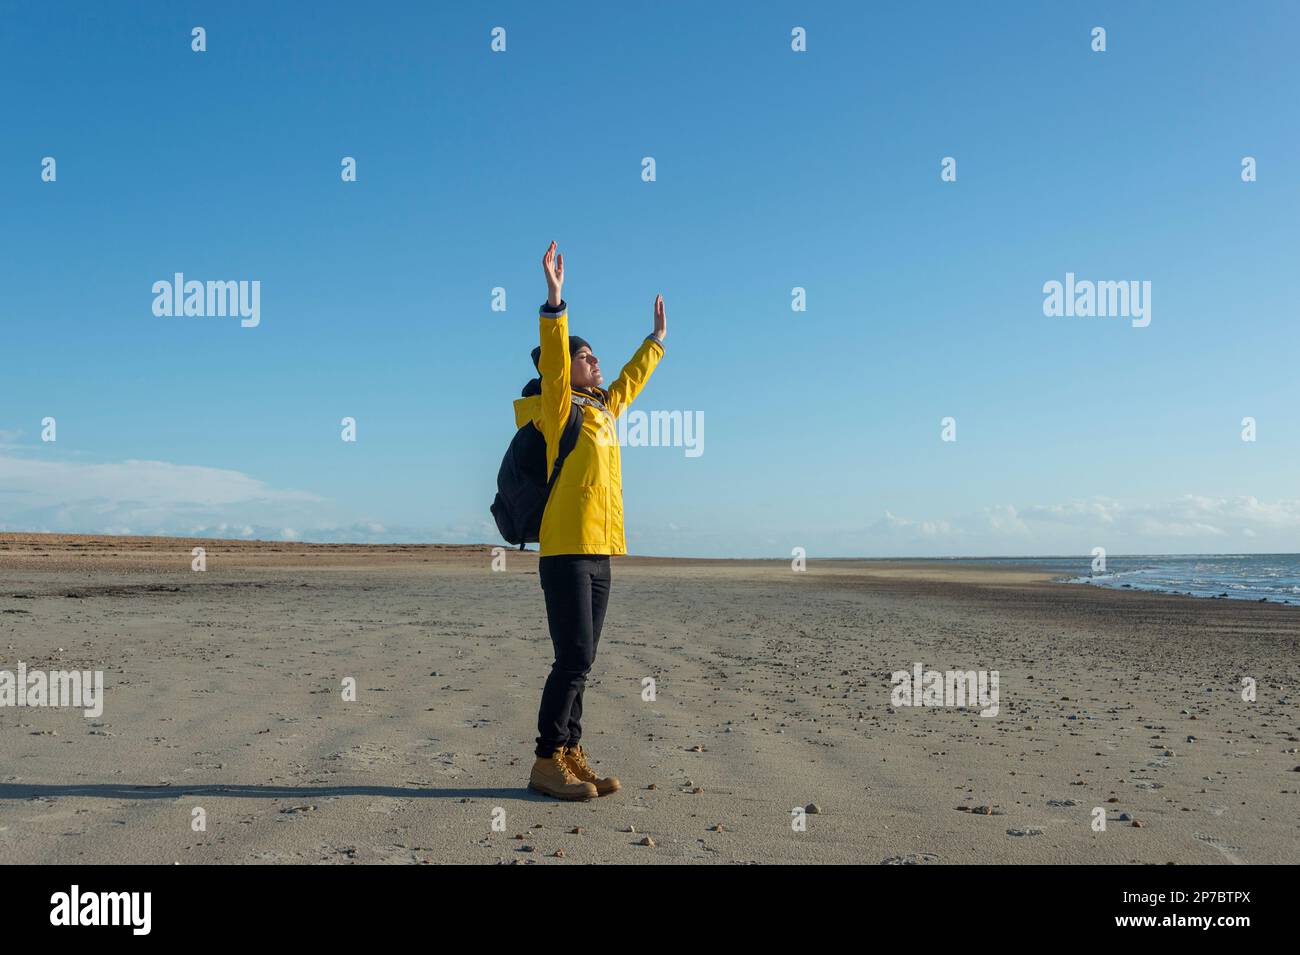 Woman in a yellow coat with her arms raised enjoying winter sunshine while walking on a beach Stock Photo